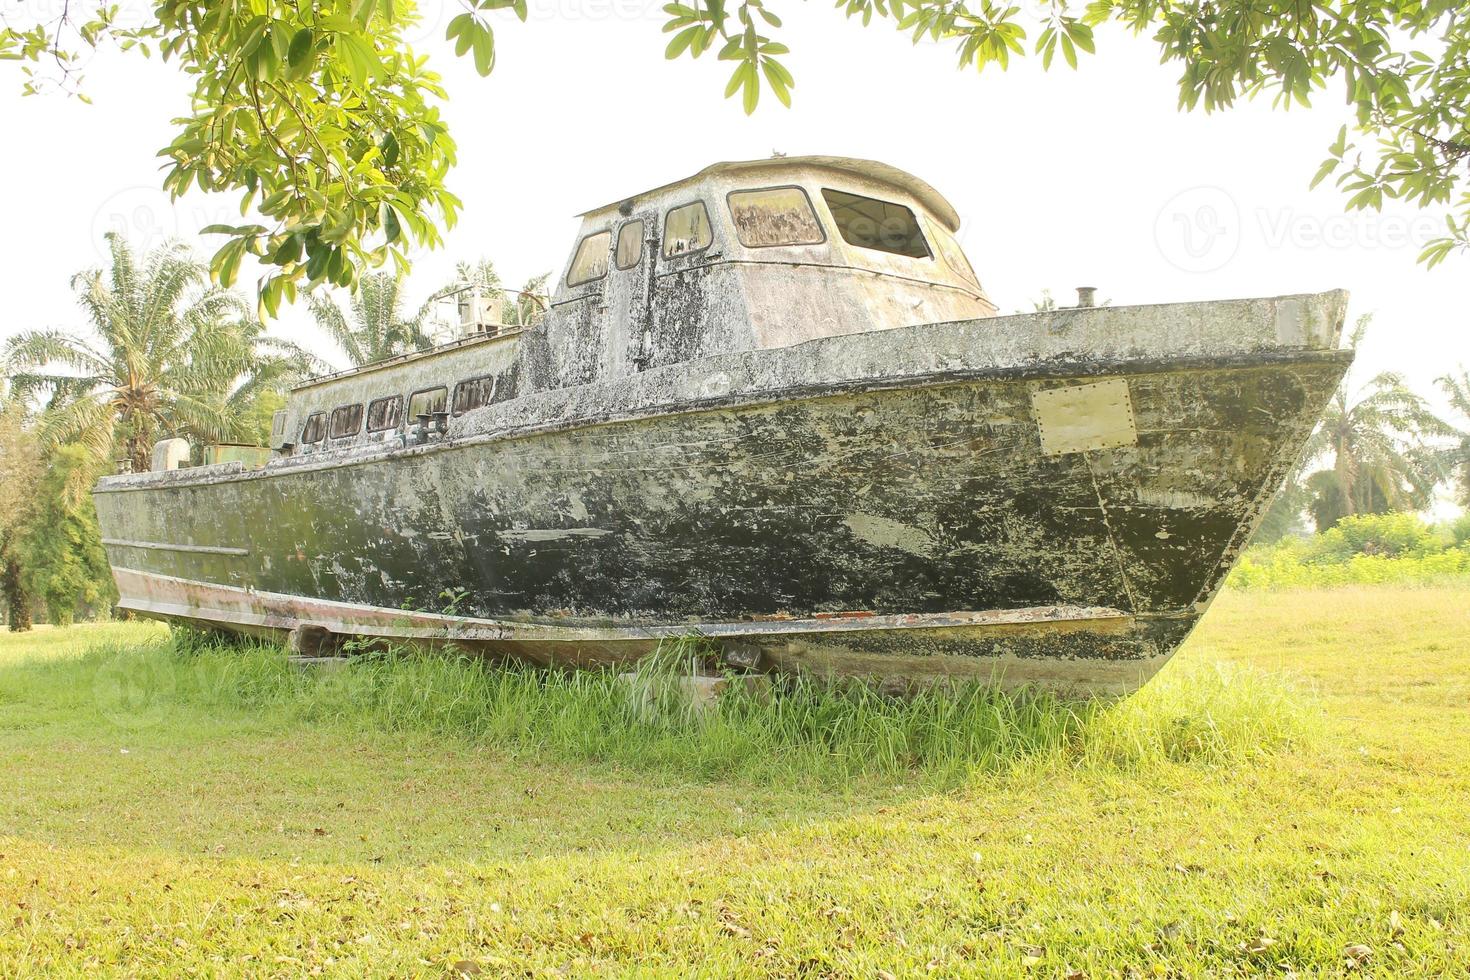 An old boat on the grass in a park. photo